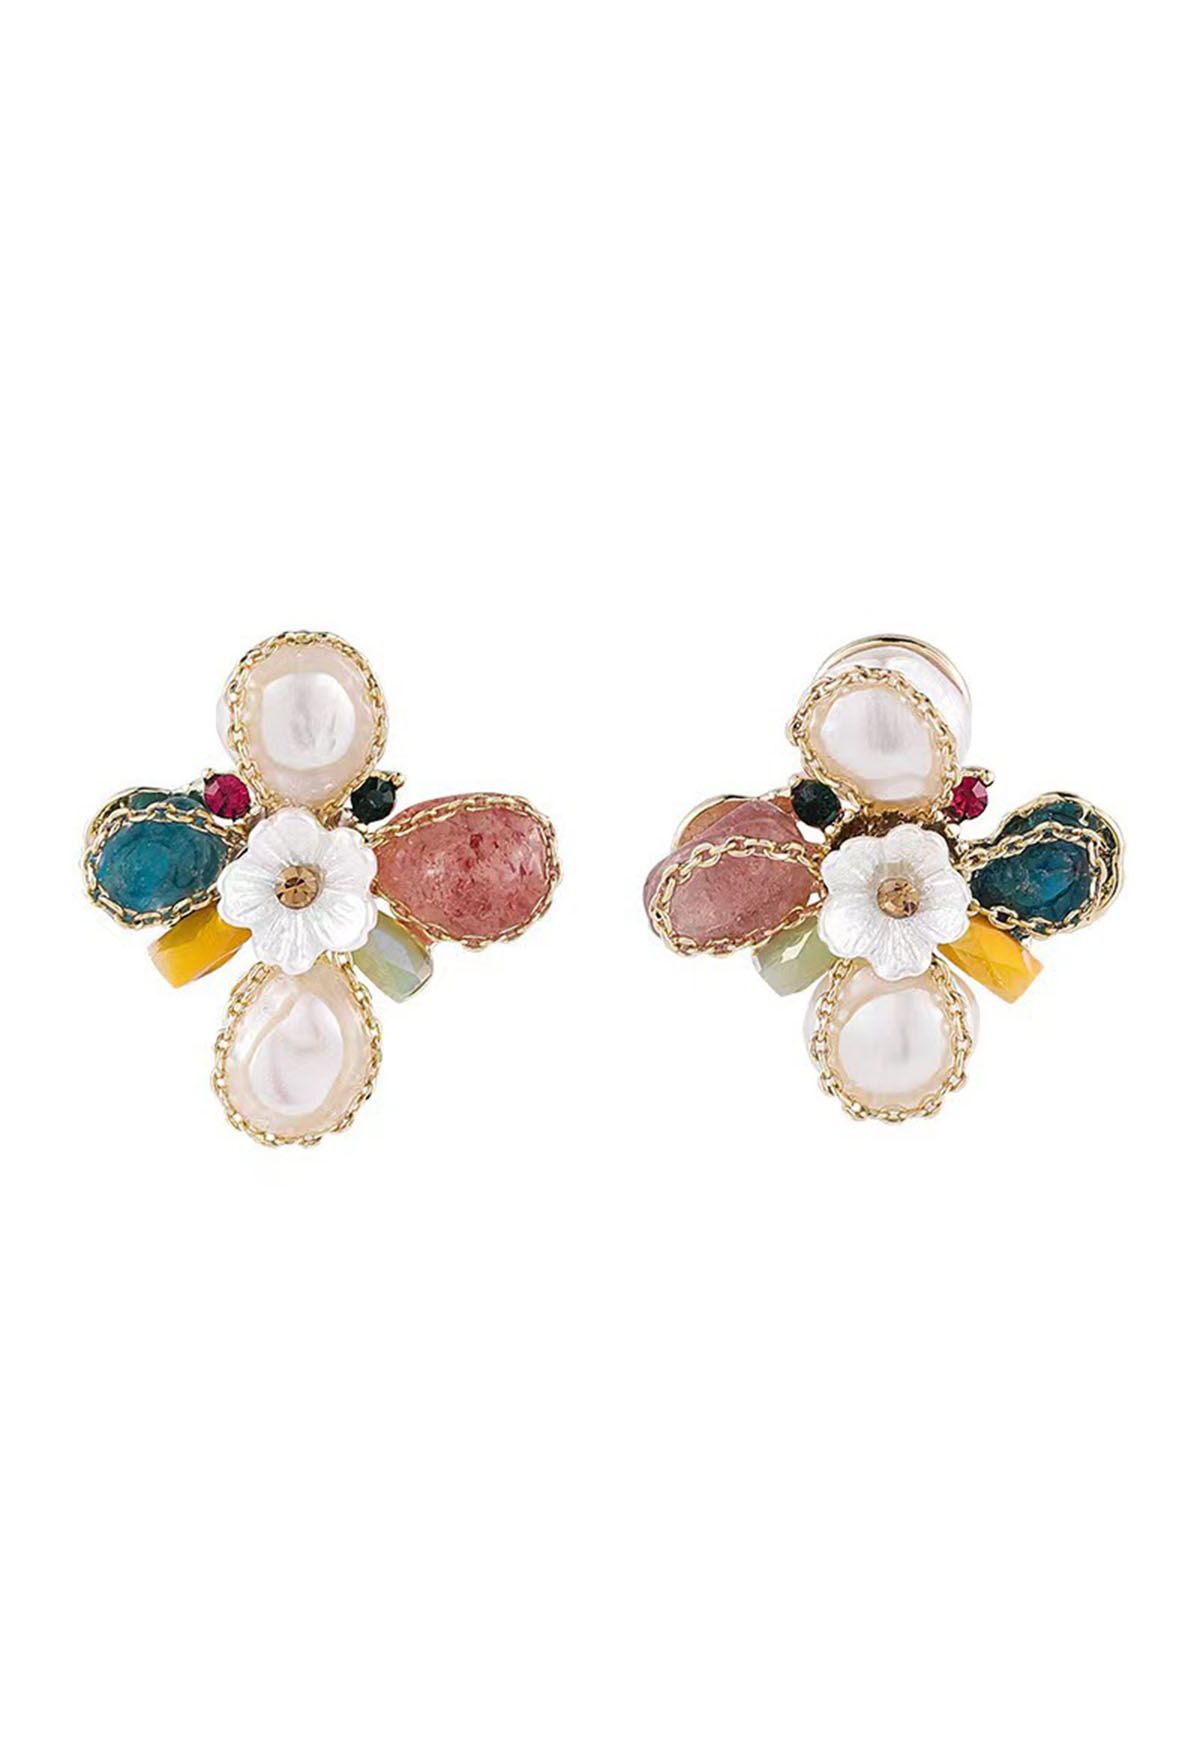 Mixed Jewelry Floral Earrings